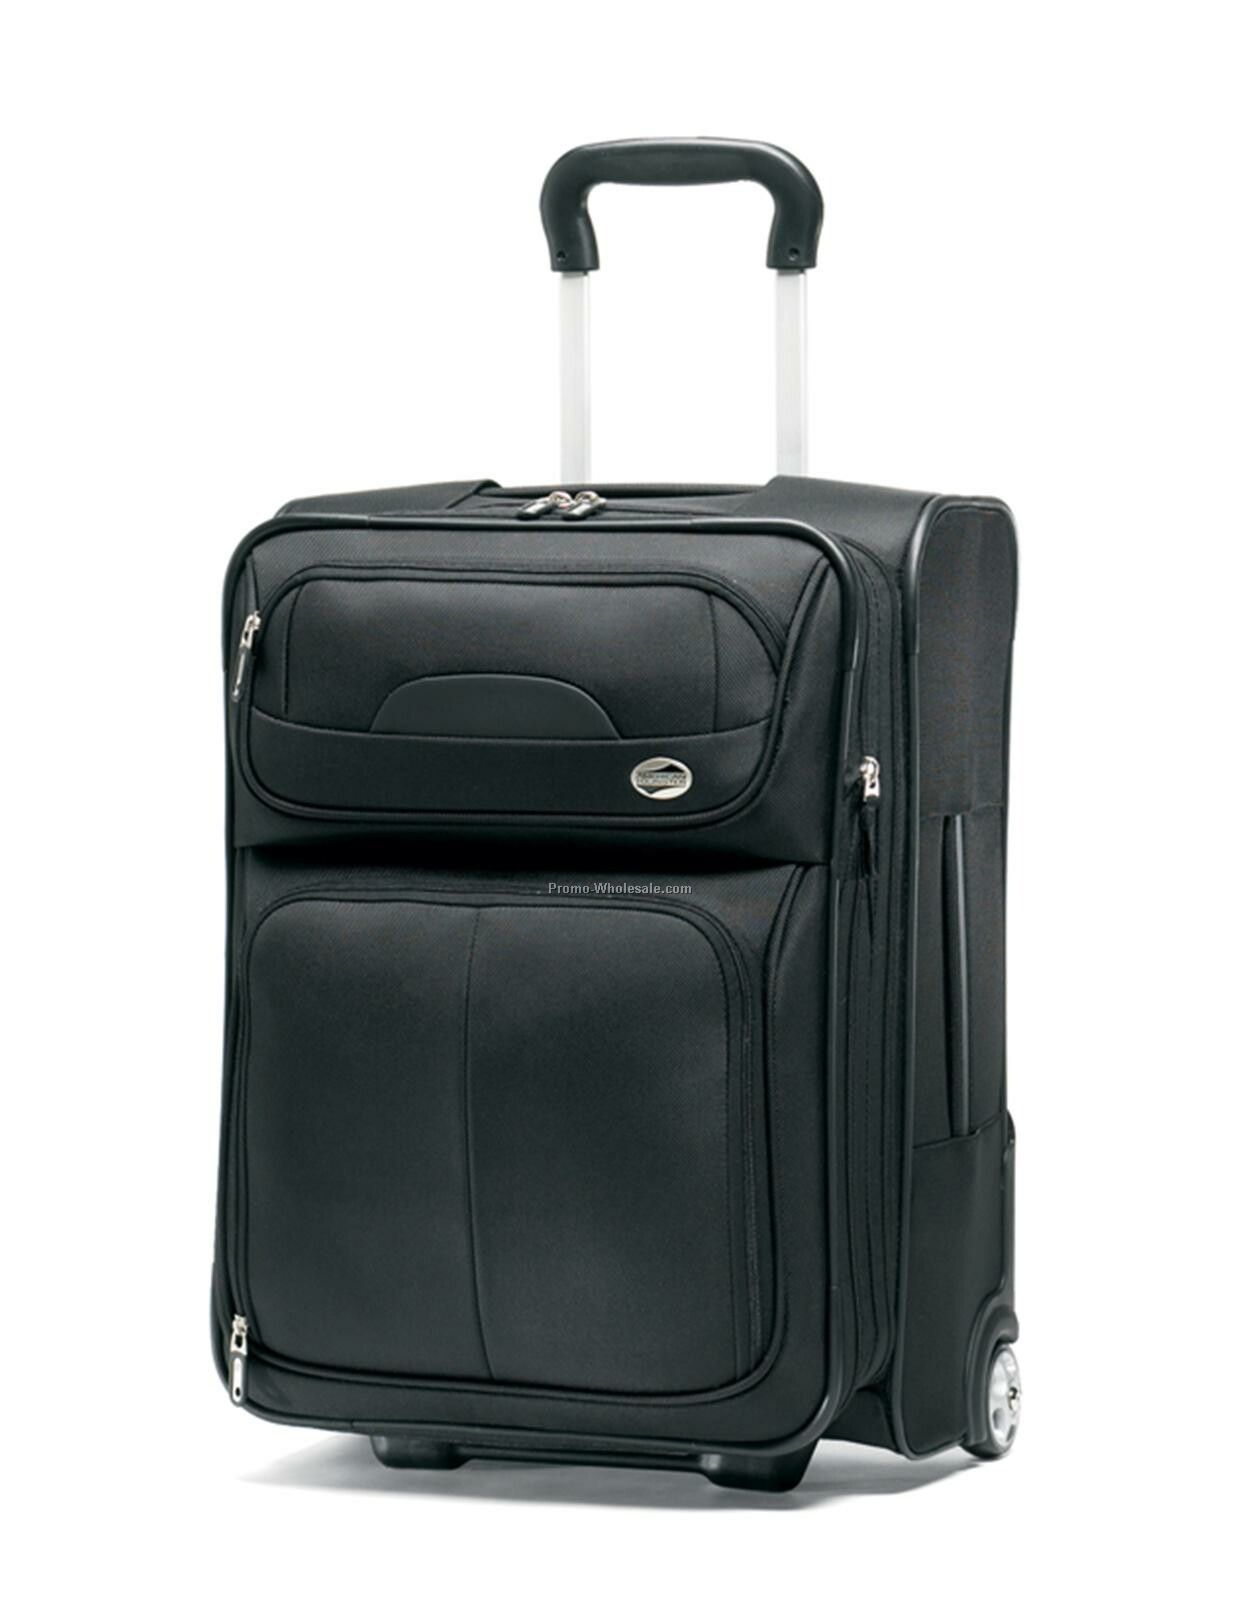 American Tourister 21" Upright Tribute Luggage